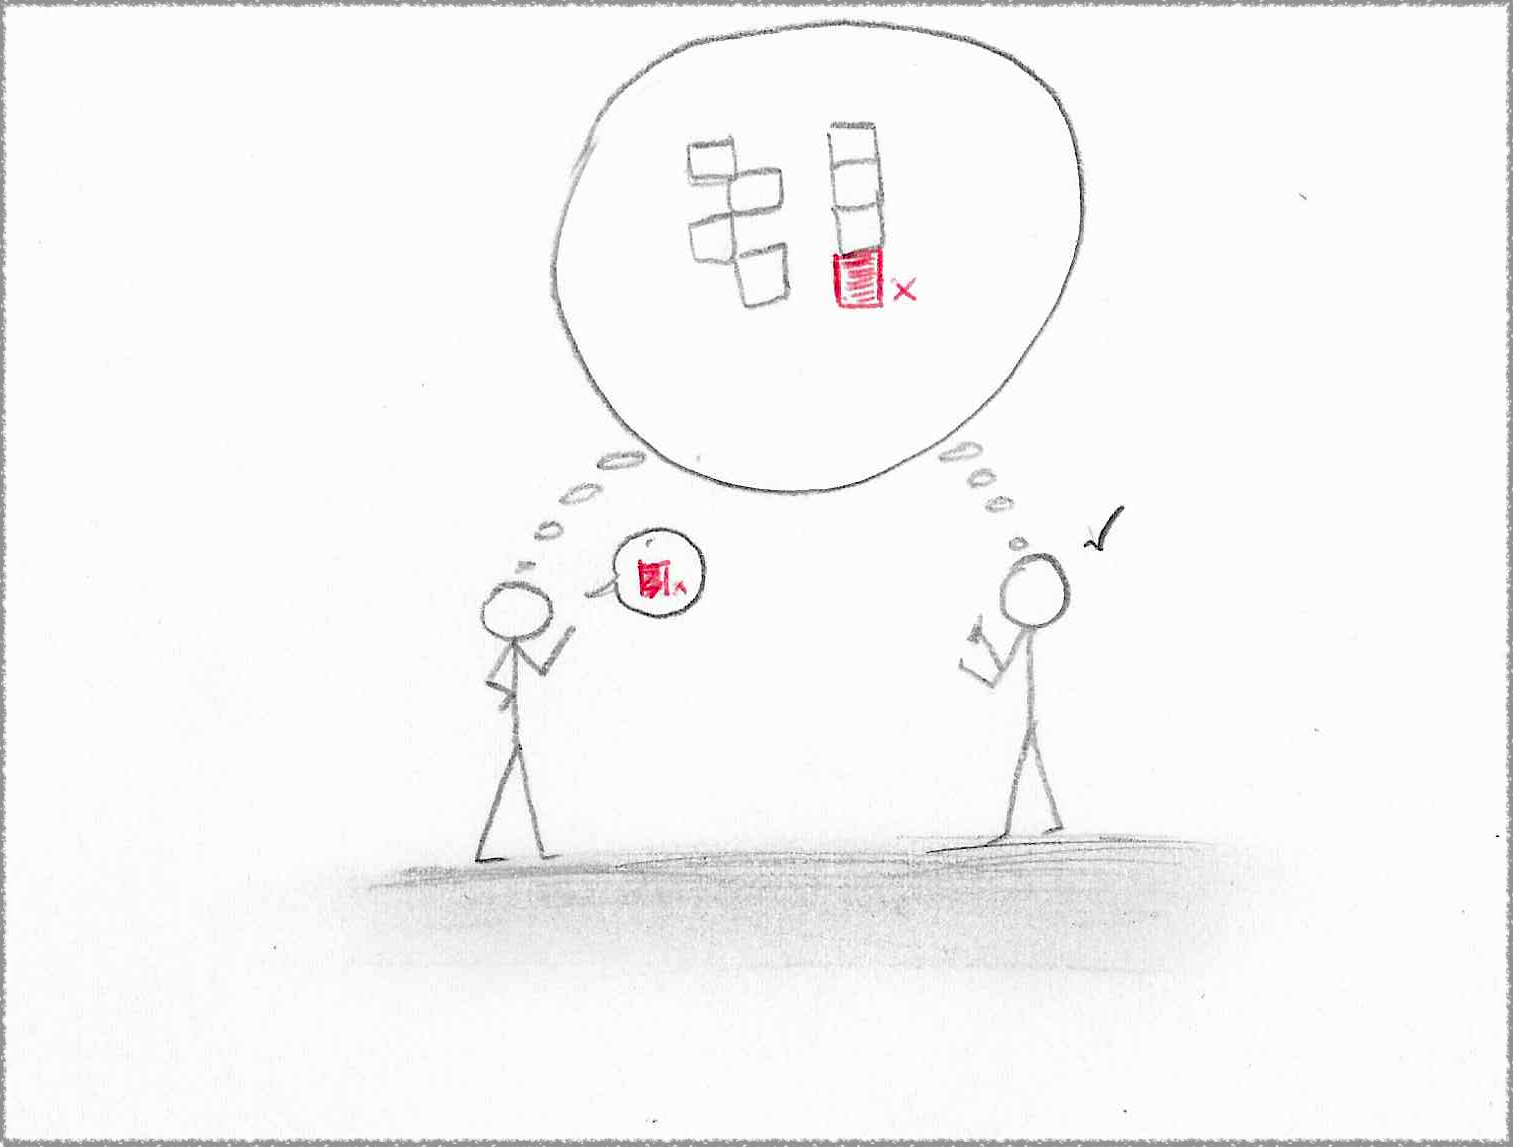 Sticky figure drawing of a person explaining an error to another person. Both are thinking of the same system diagram, and the person receiving the information seems to understand the problem.